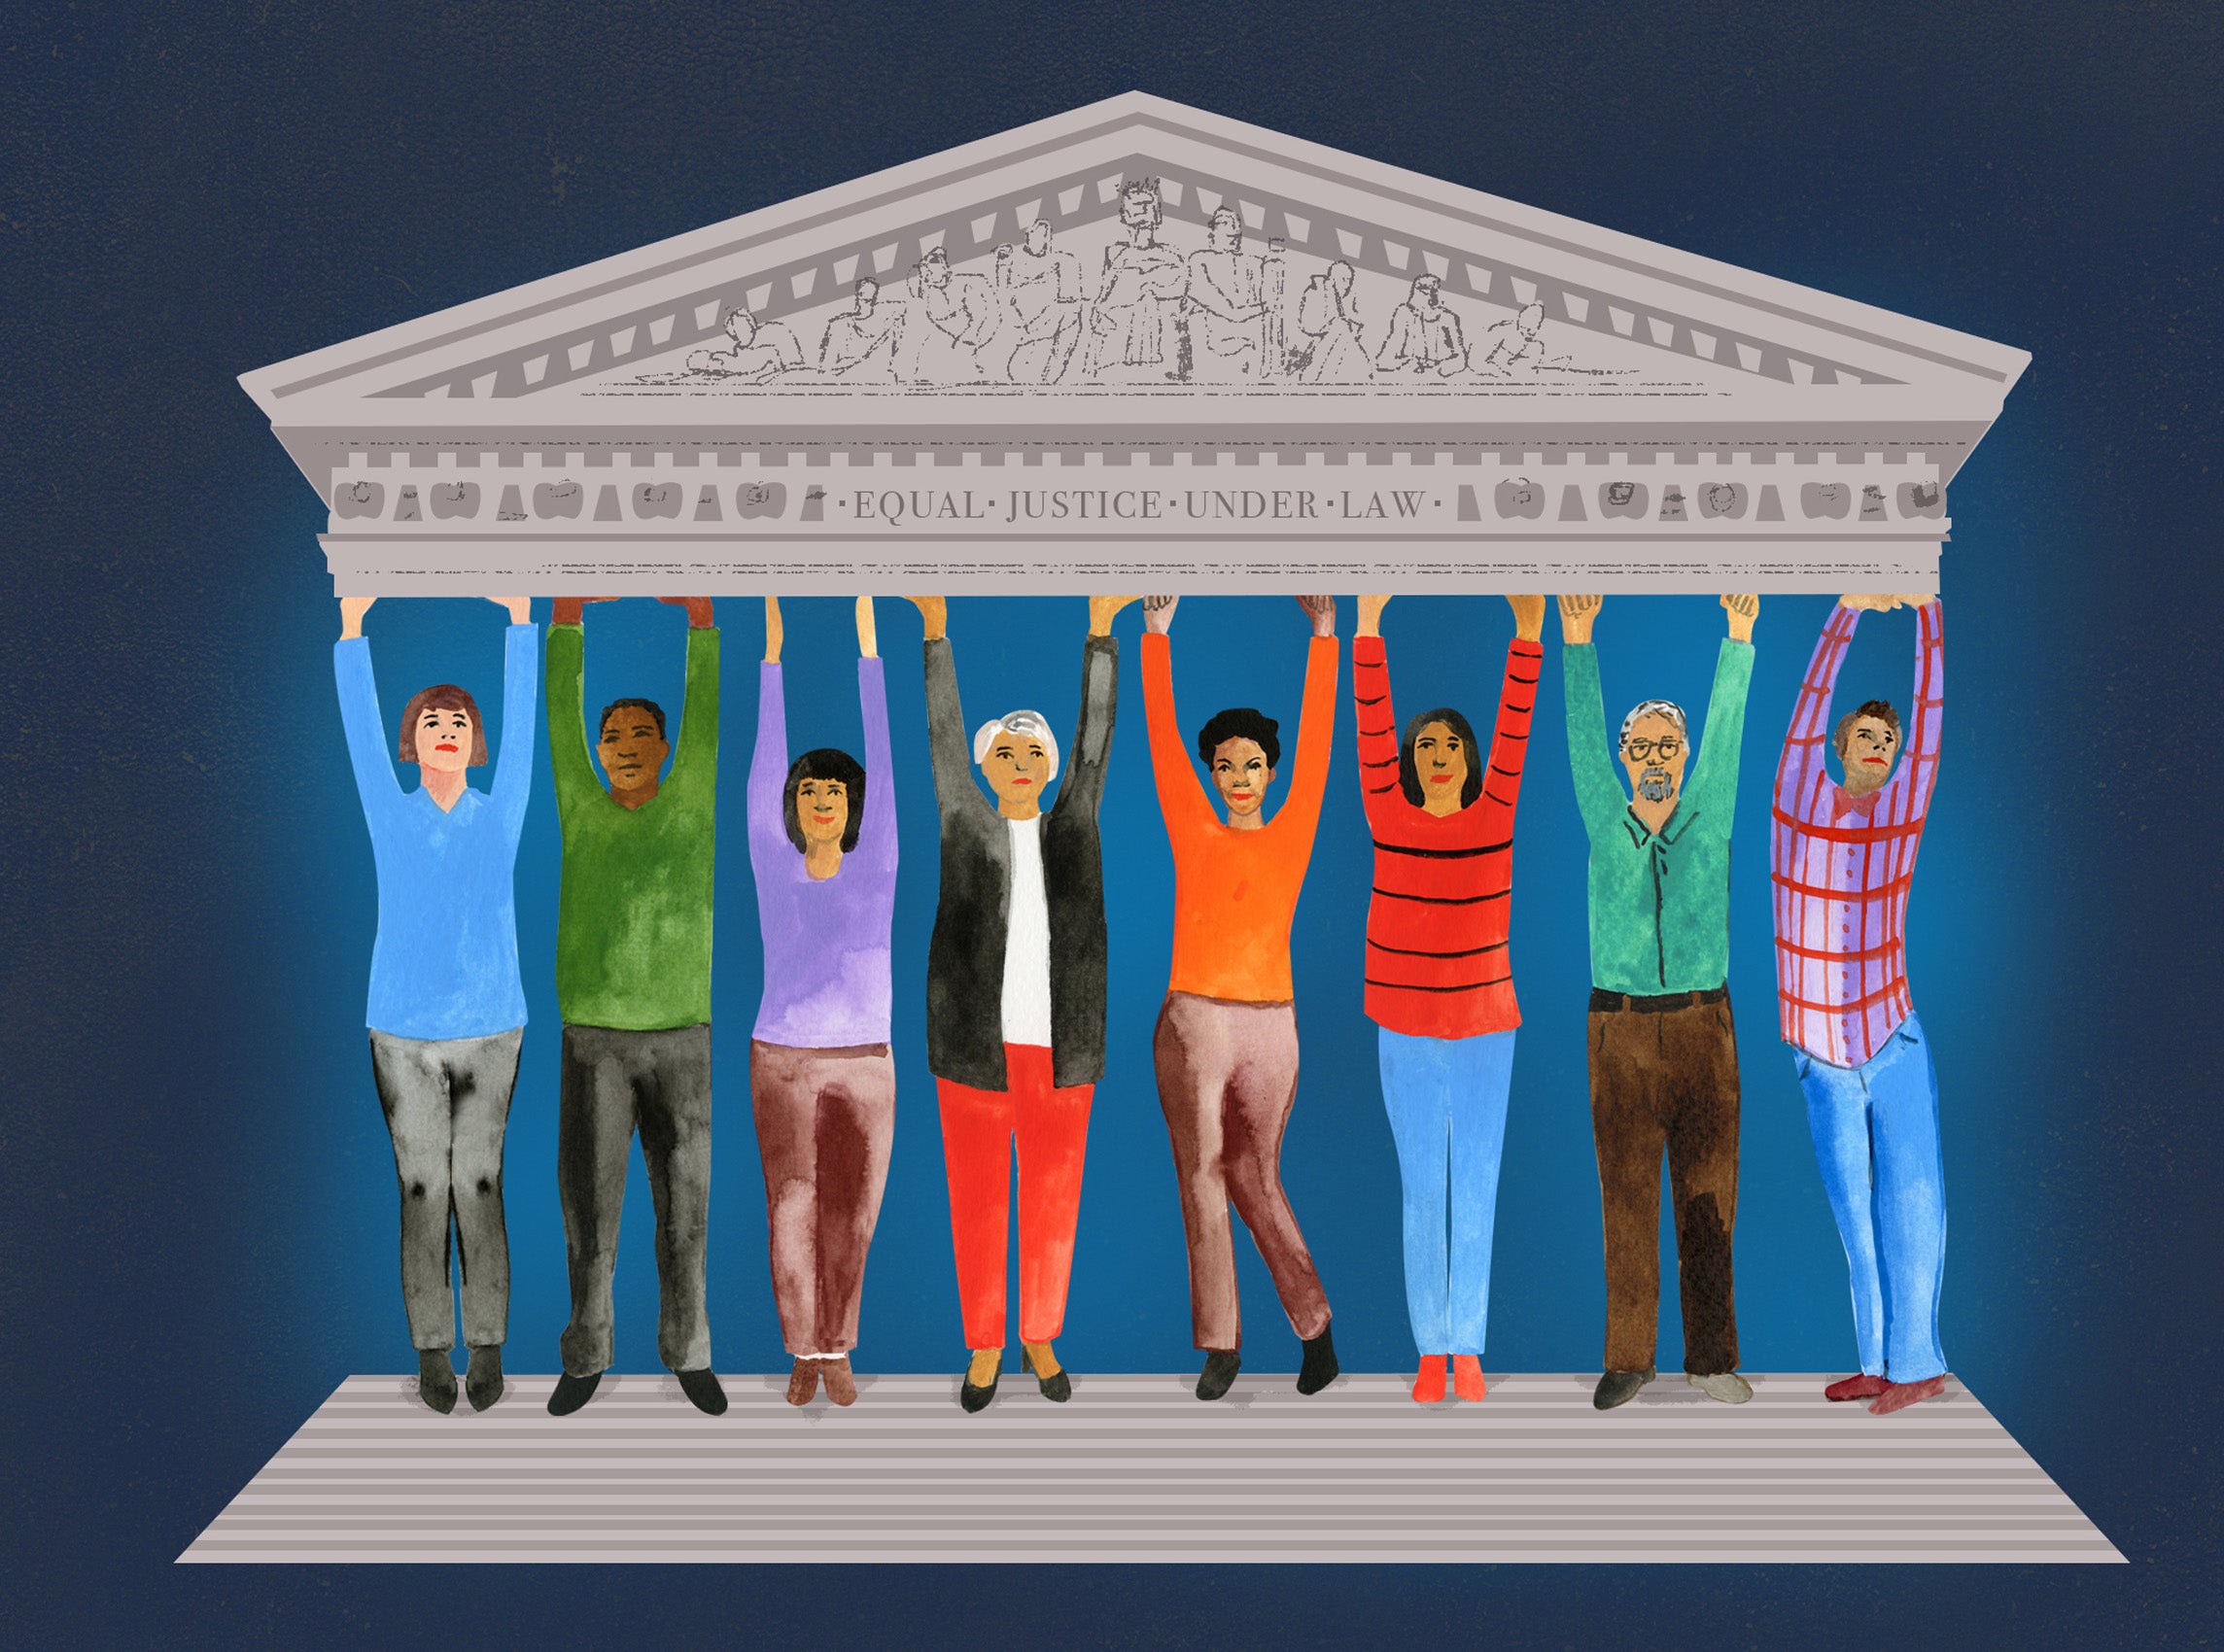 Illustration of a group of people standing like columns with their hands up supporting the top of the U.S. Supreme Court building